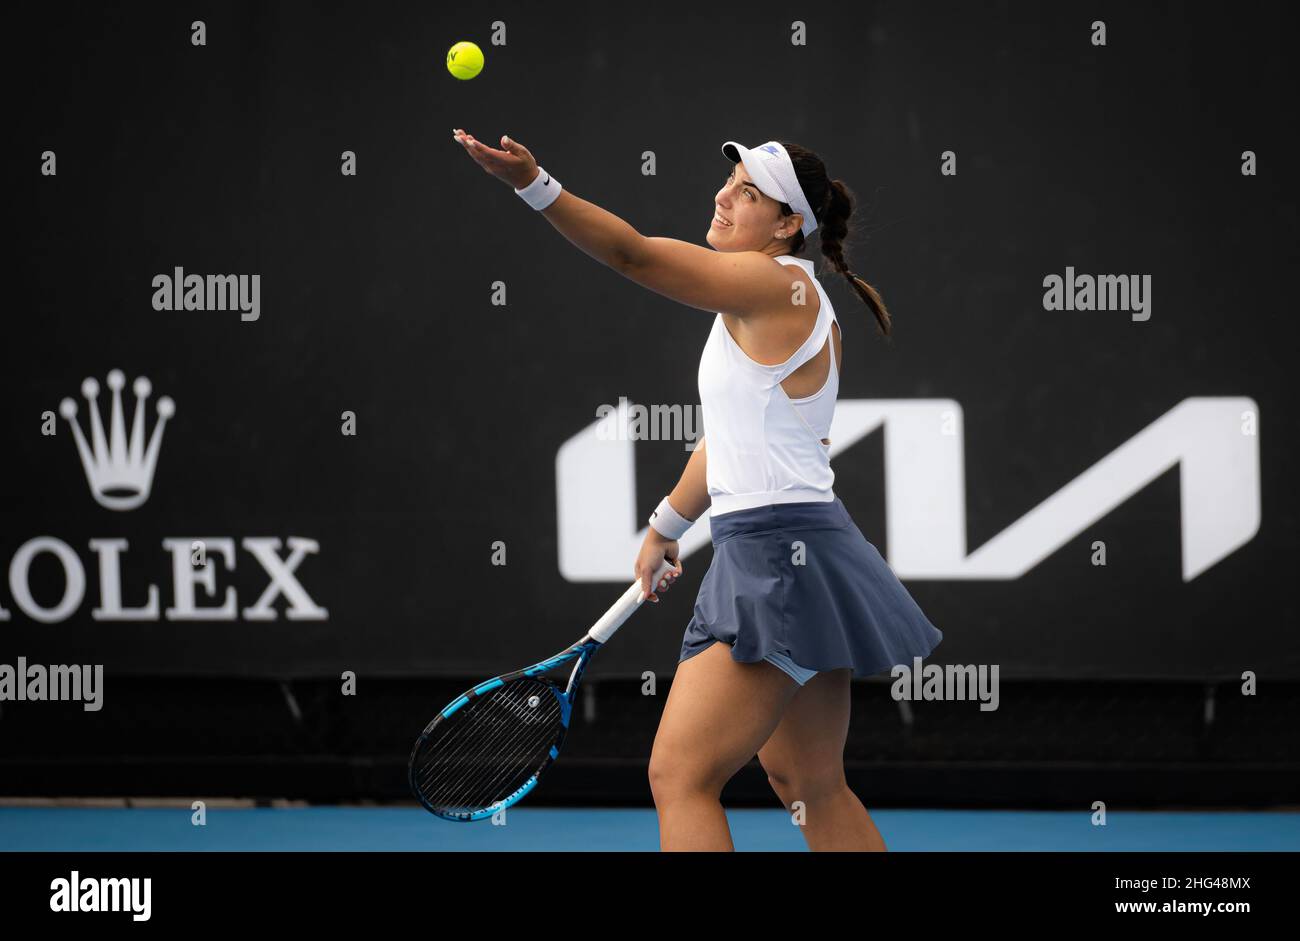 18th January 2022. Ana Konjuh of Croatia in action against Shelby Rogers of United States during the first round of the 2022 Australian Open, WTA Grand Slam tennis tournament on January 18, 2022 at Melbourne Park in Melbourne, Australia - Photo: Rob Prange/DPPI/LiveMedia Credit: Independent Photo Agency/Alamy Live News Stock Photo